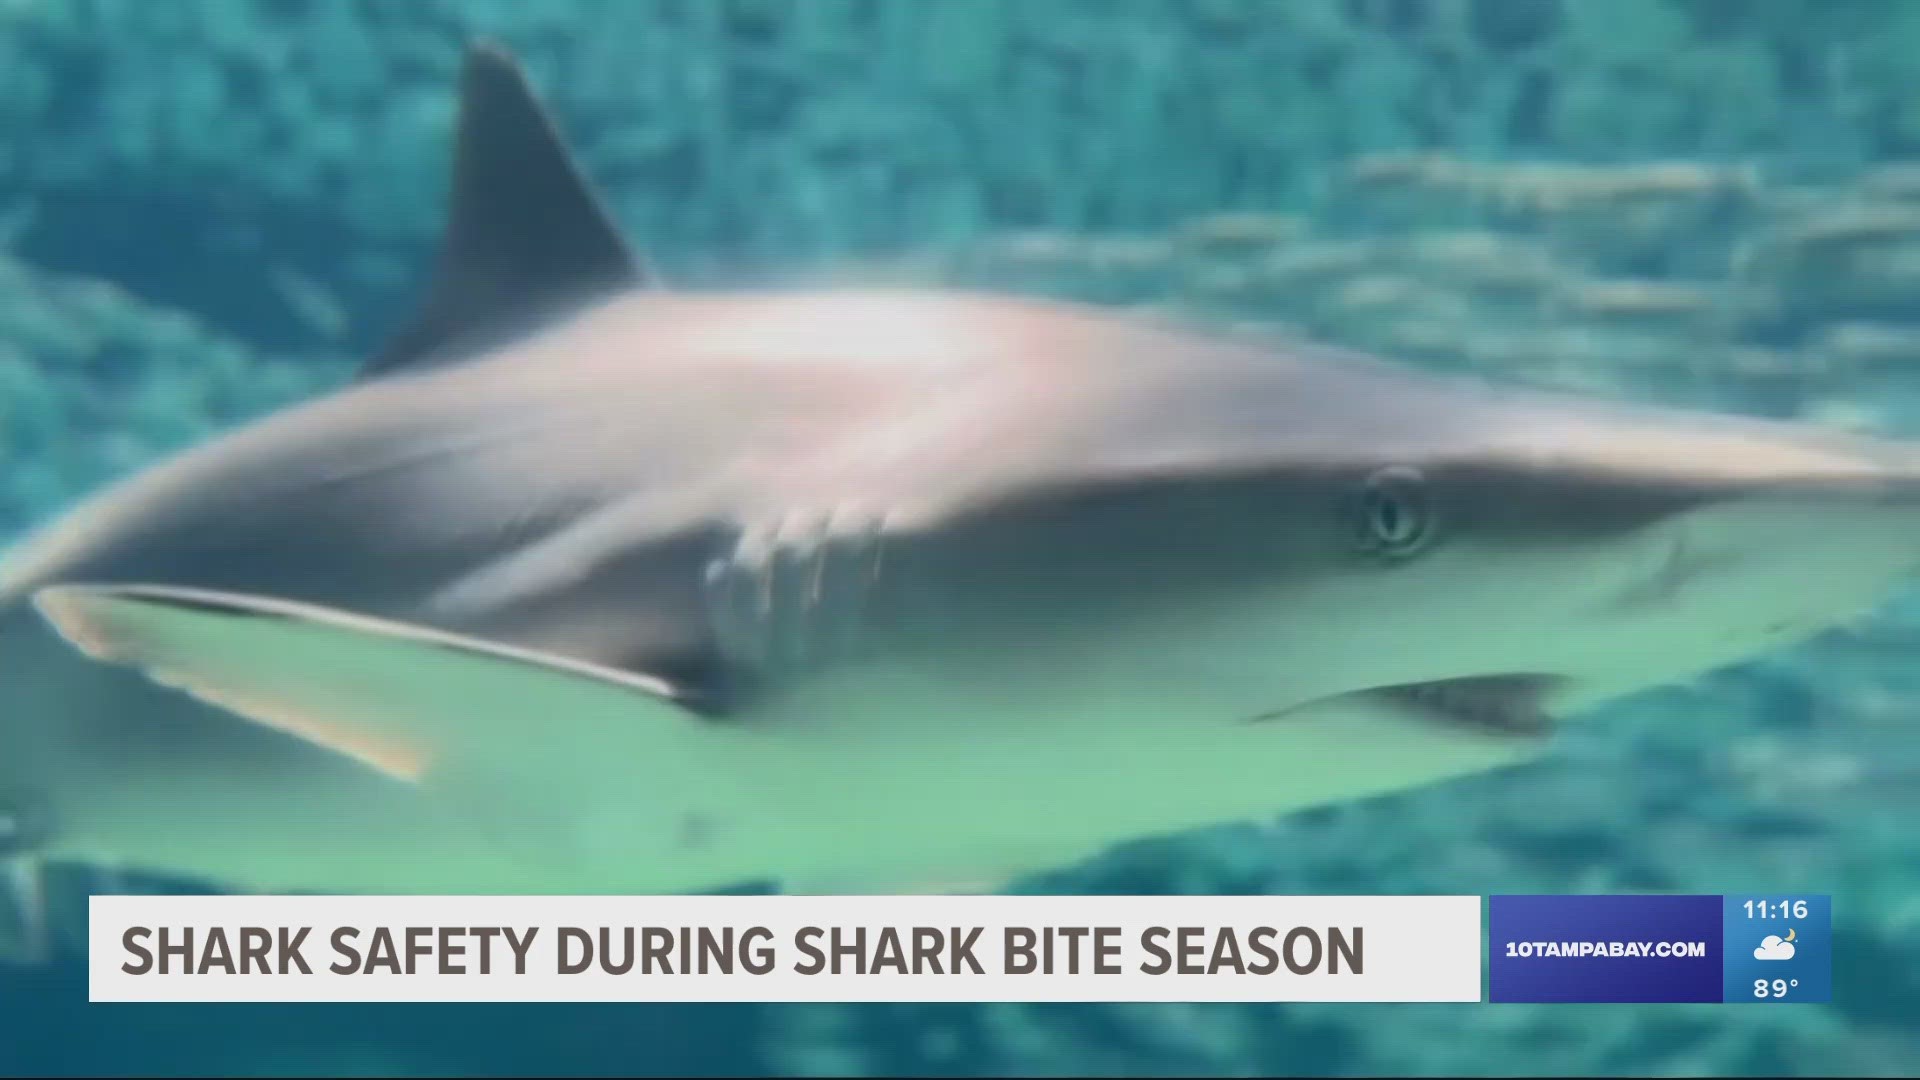 In total, there were 16 shark bites in Florida in 2022 – more than anywhere else in the world.